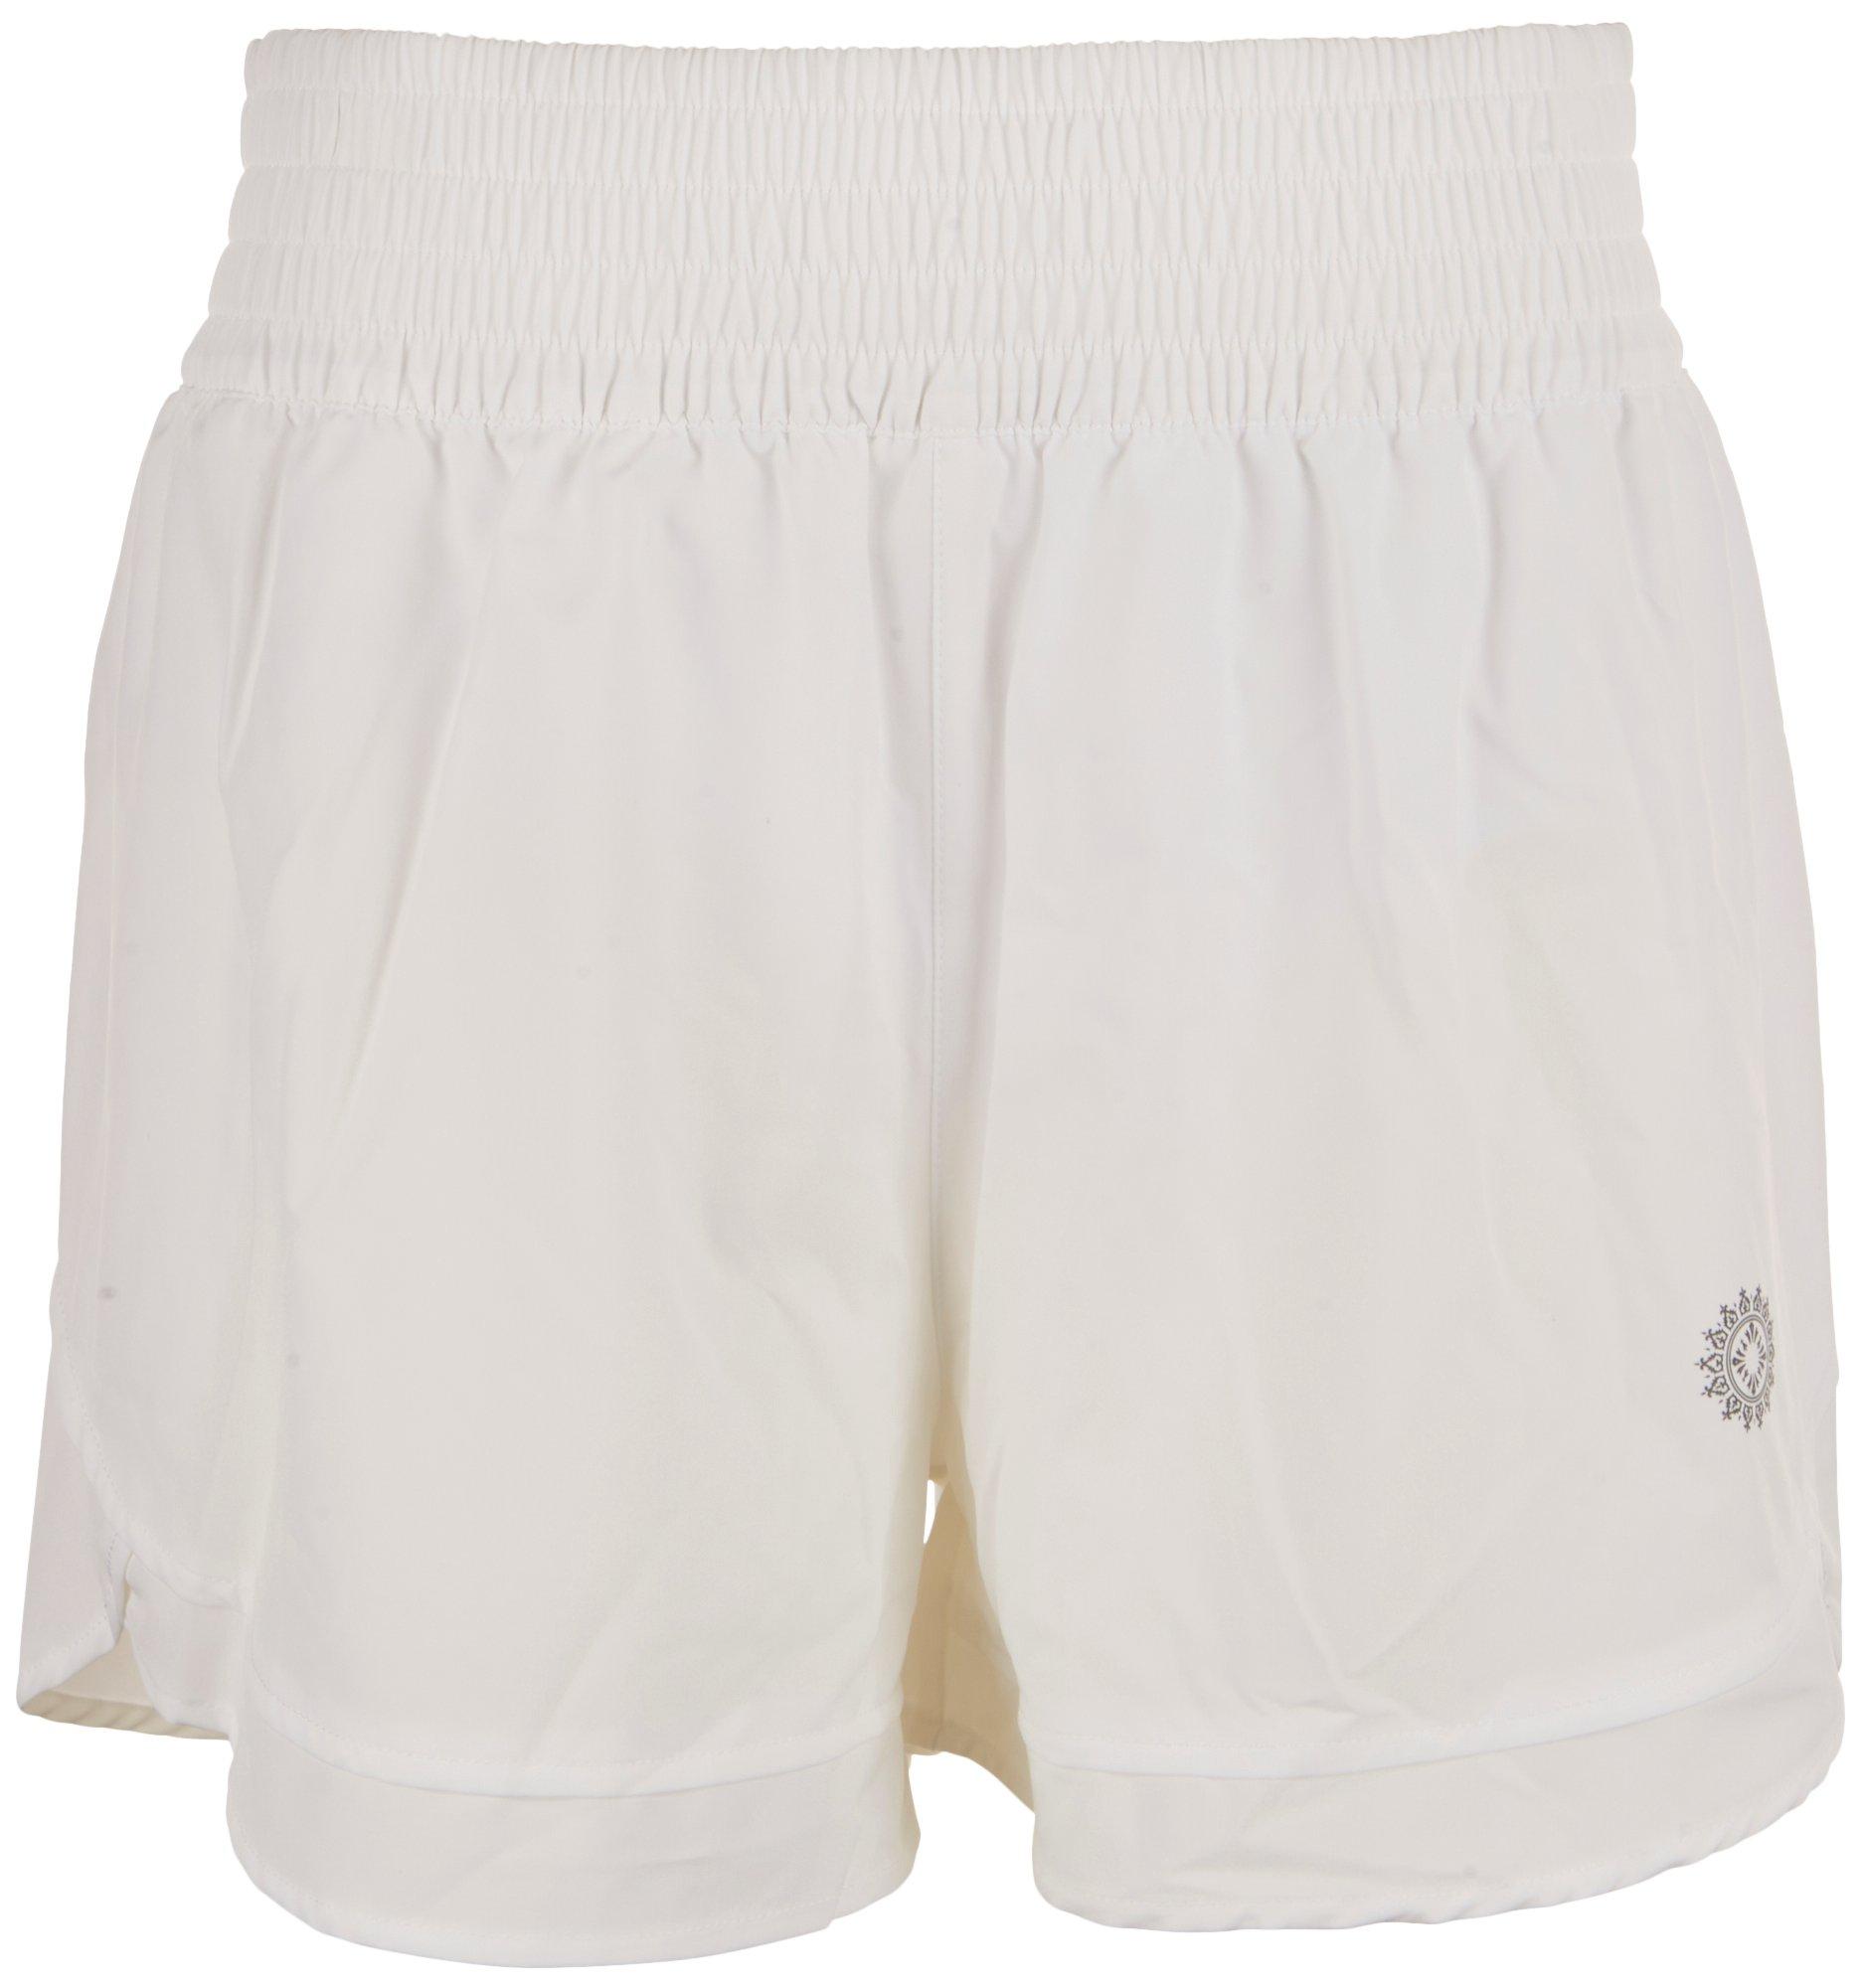 Brisas Womens 4 in. Solid Woven Shorts